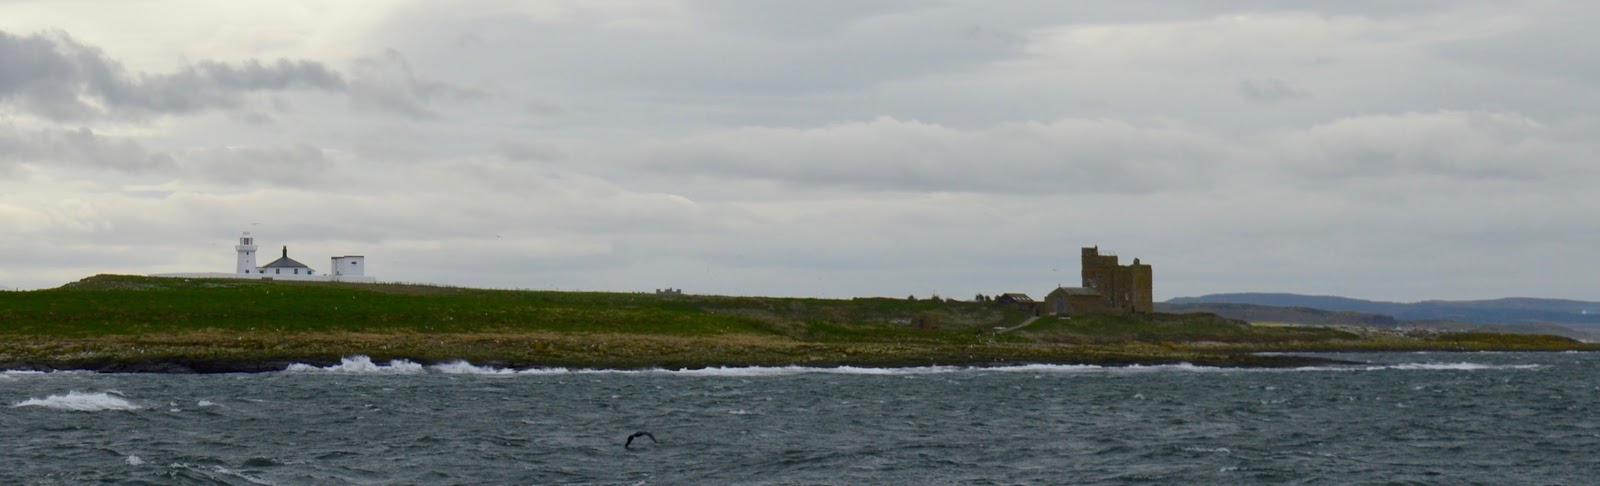 Farne Island Boat Trips with Serenity | A review and what to expect with kids